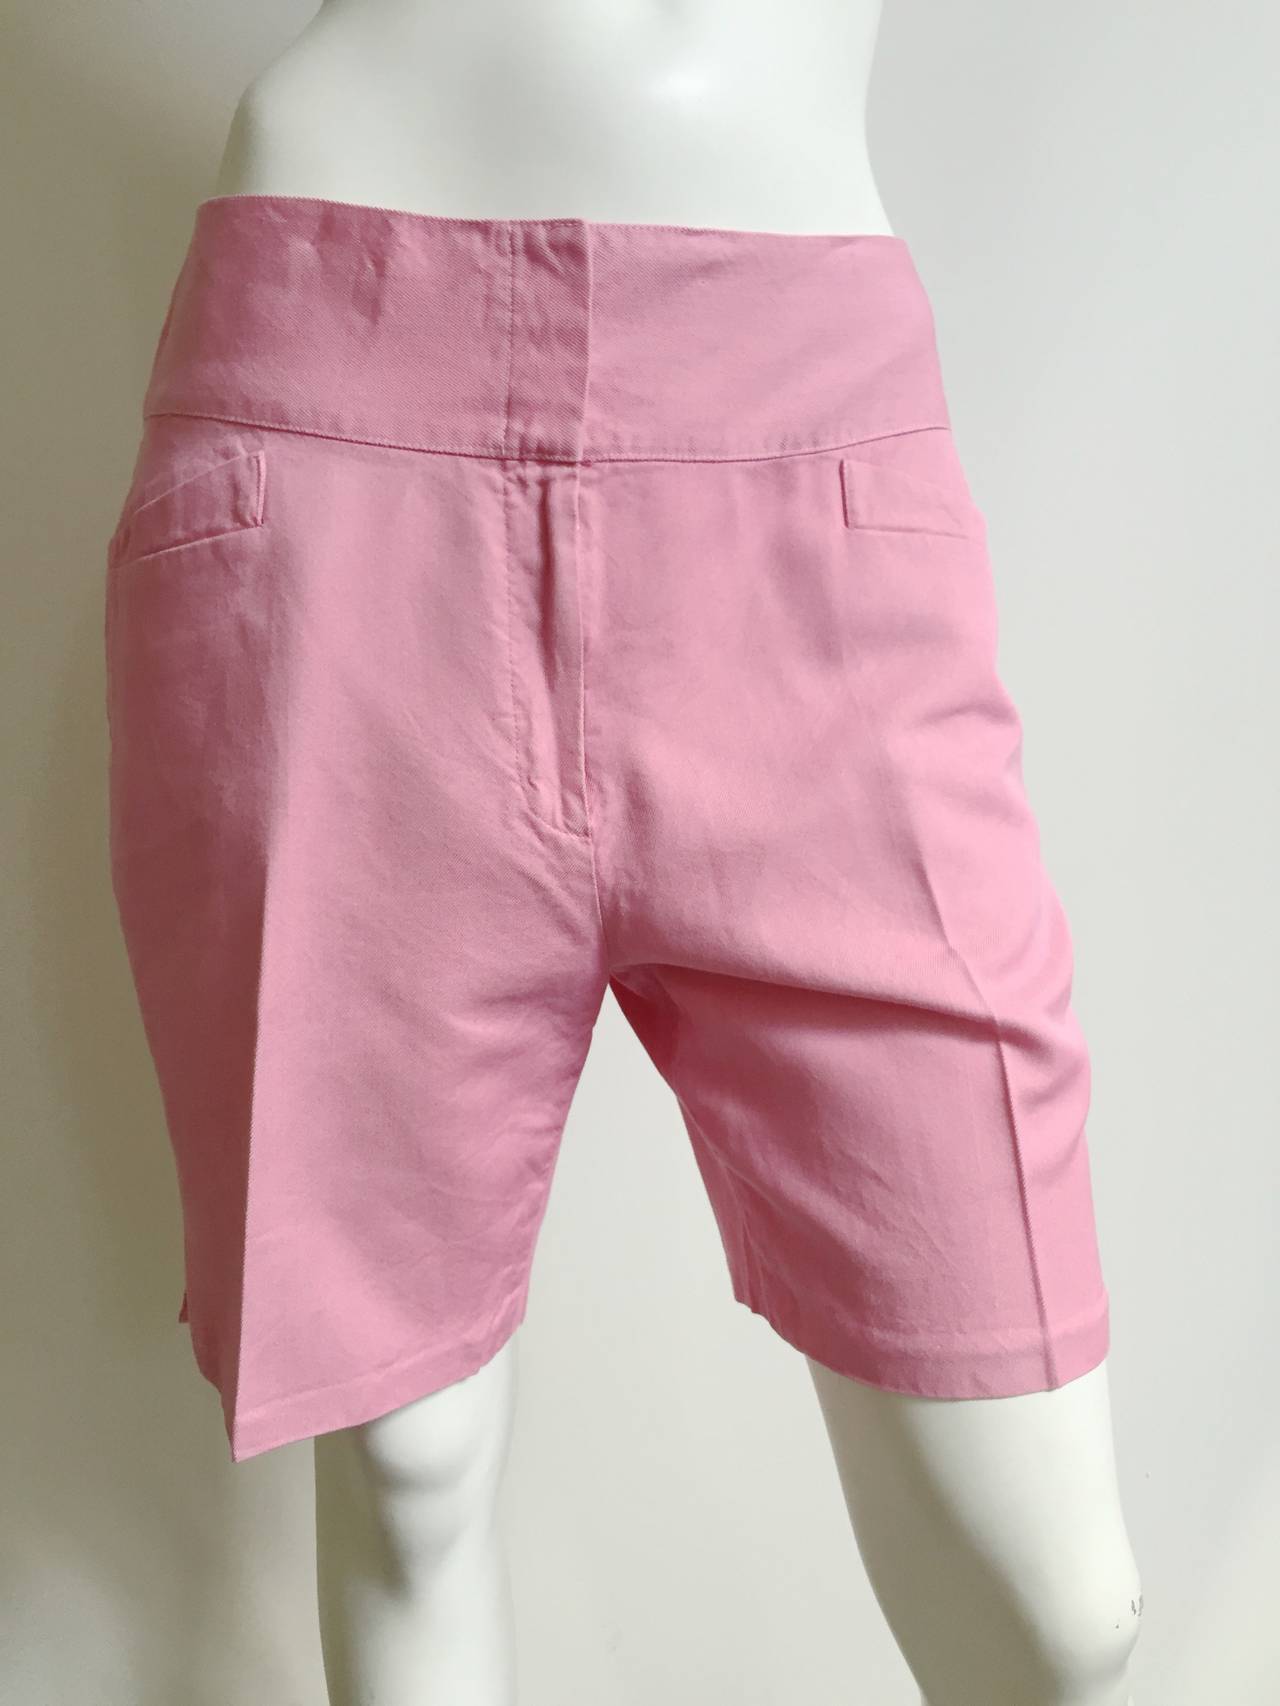 Thierry Mugler Couture 1990's pink cotton denim shorts is a USA size 10.  Please see & use the measurements I provide so that you can properly measure your waist. Front angular design pockets. Worn with your vintage Chanel silk blouse you will